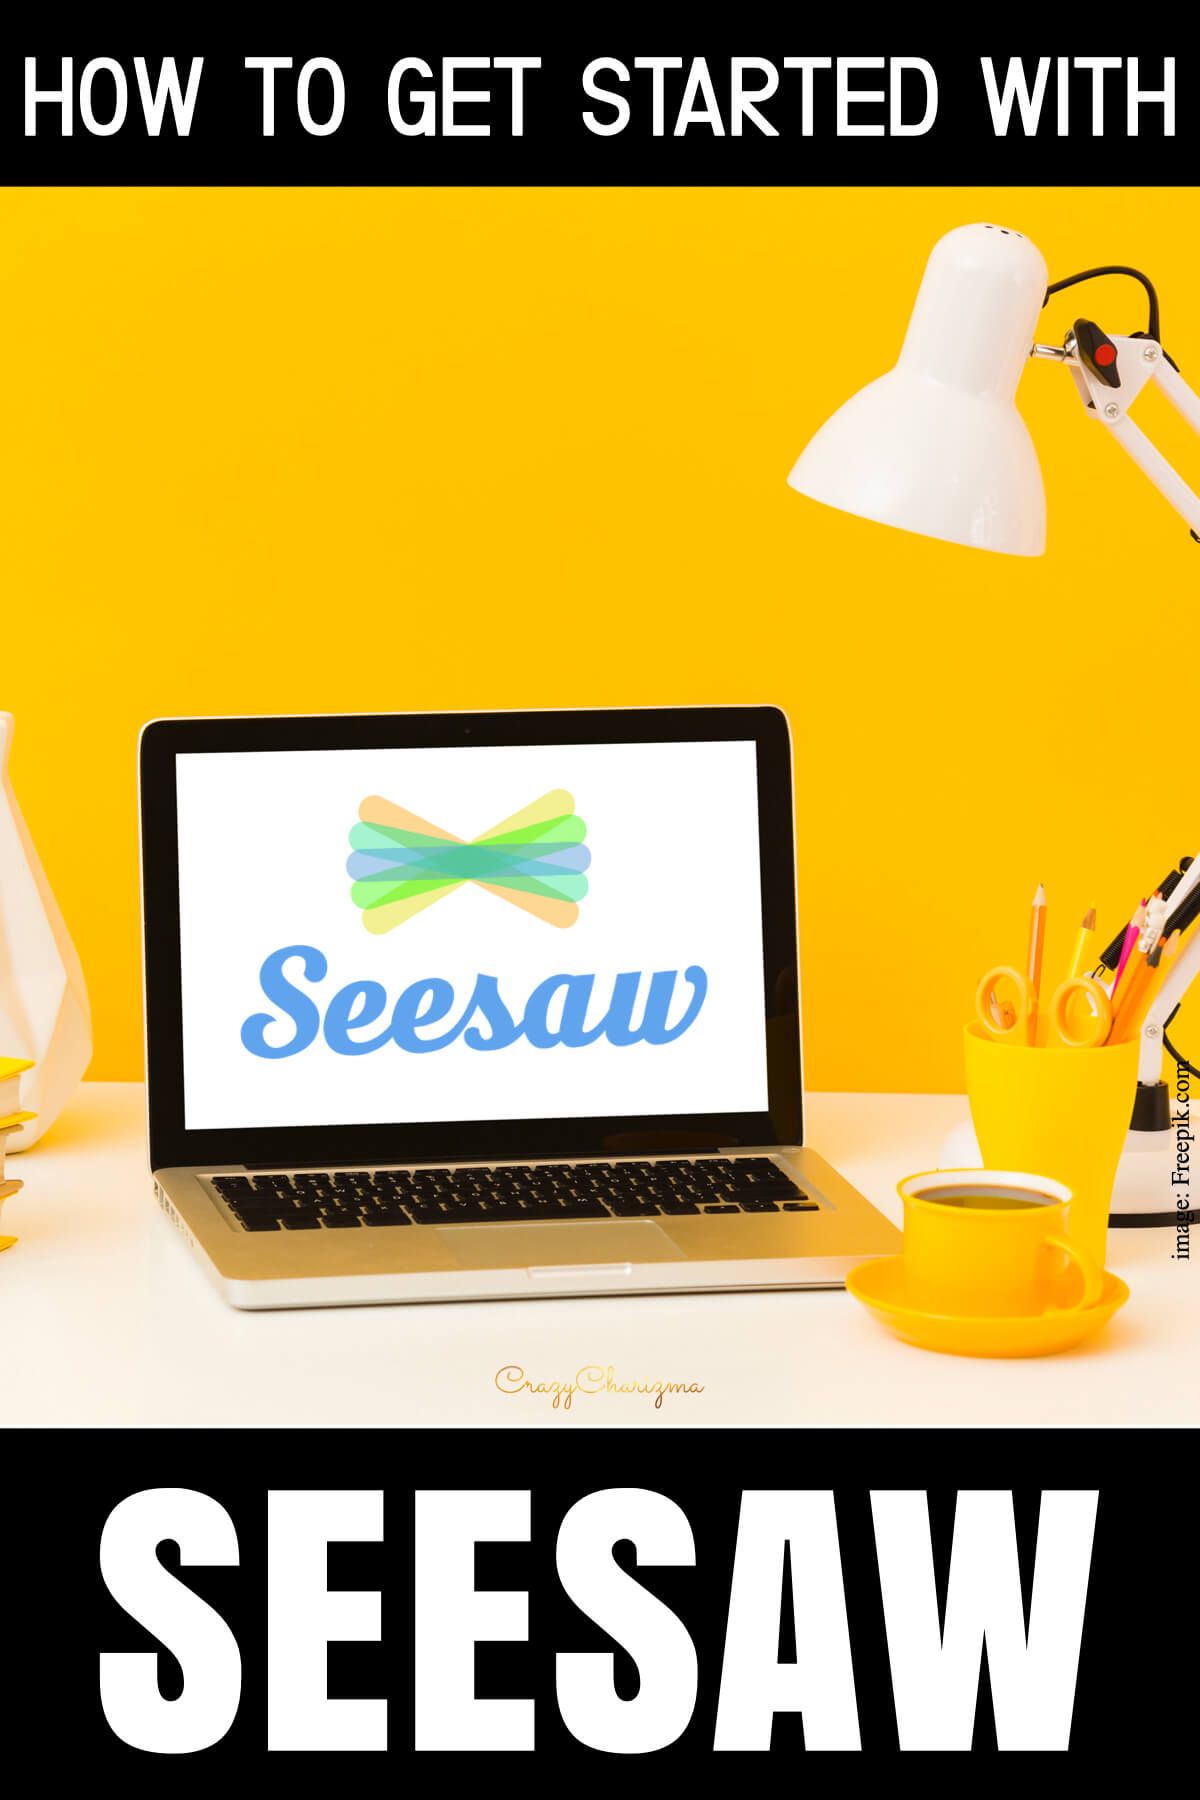 Getting started with Seesaw